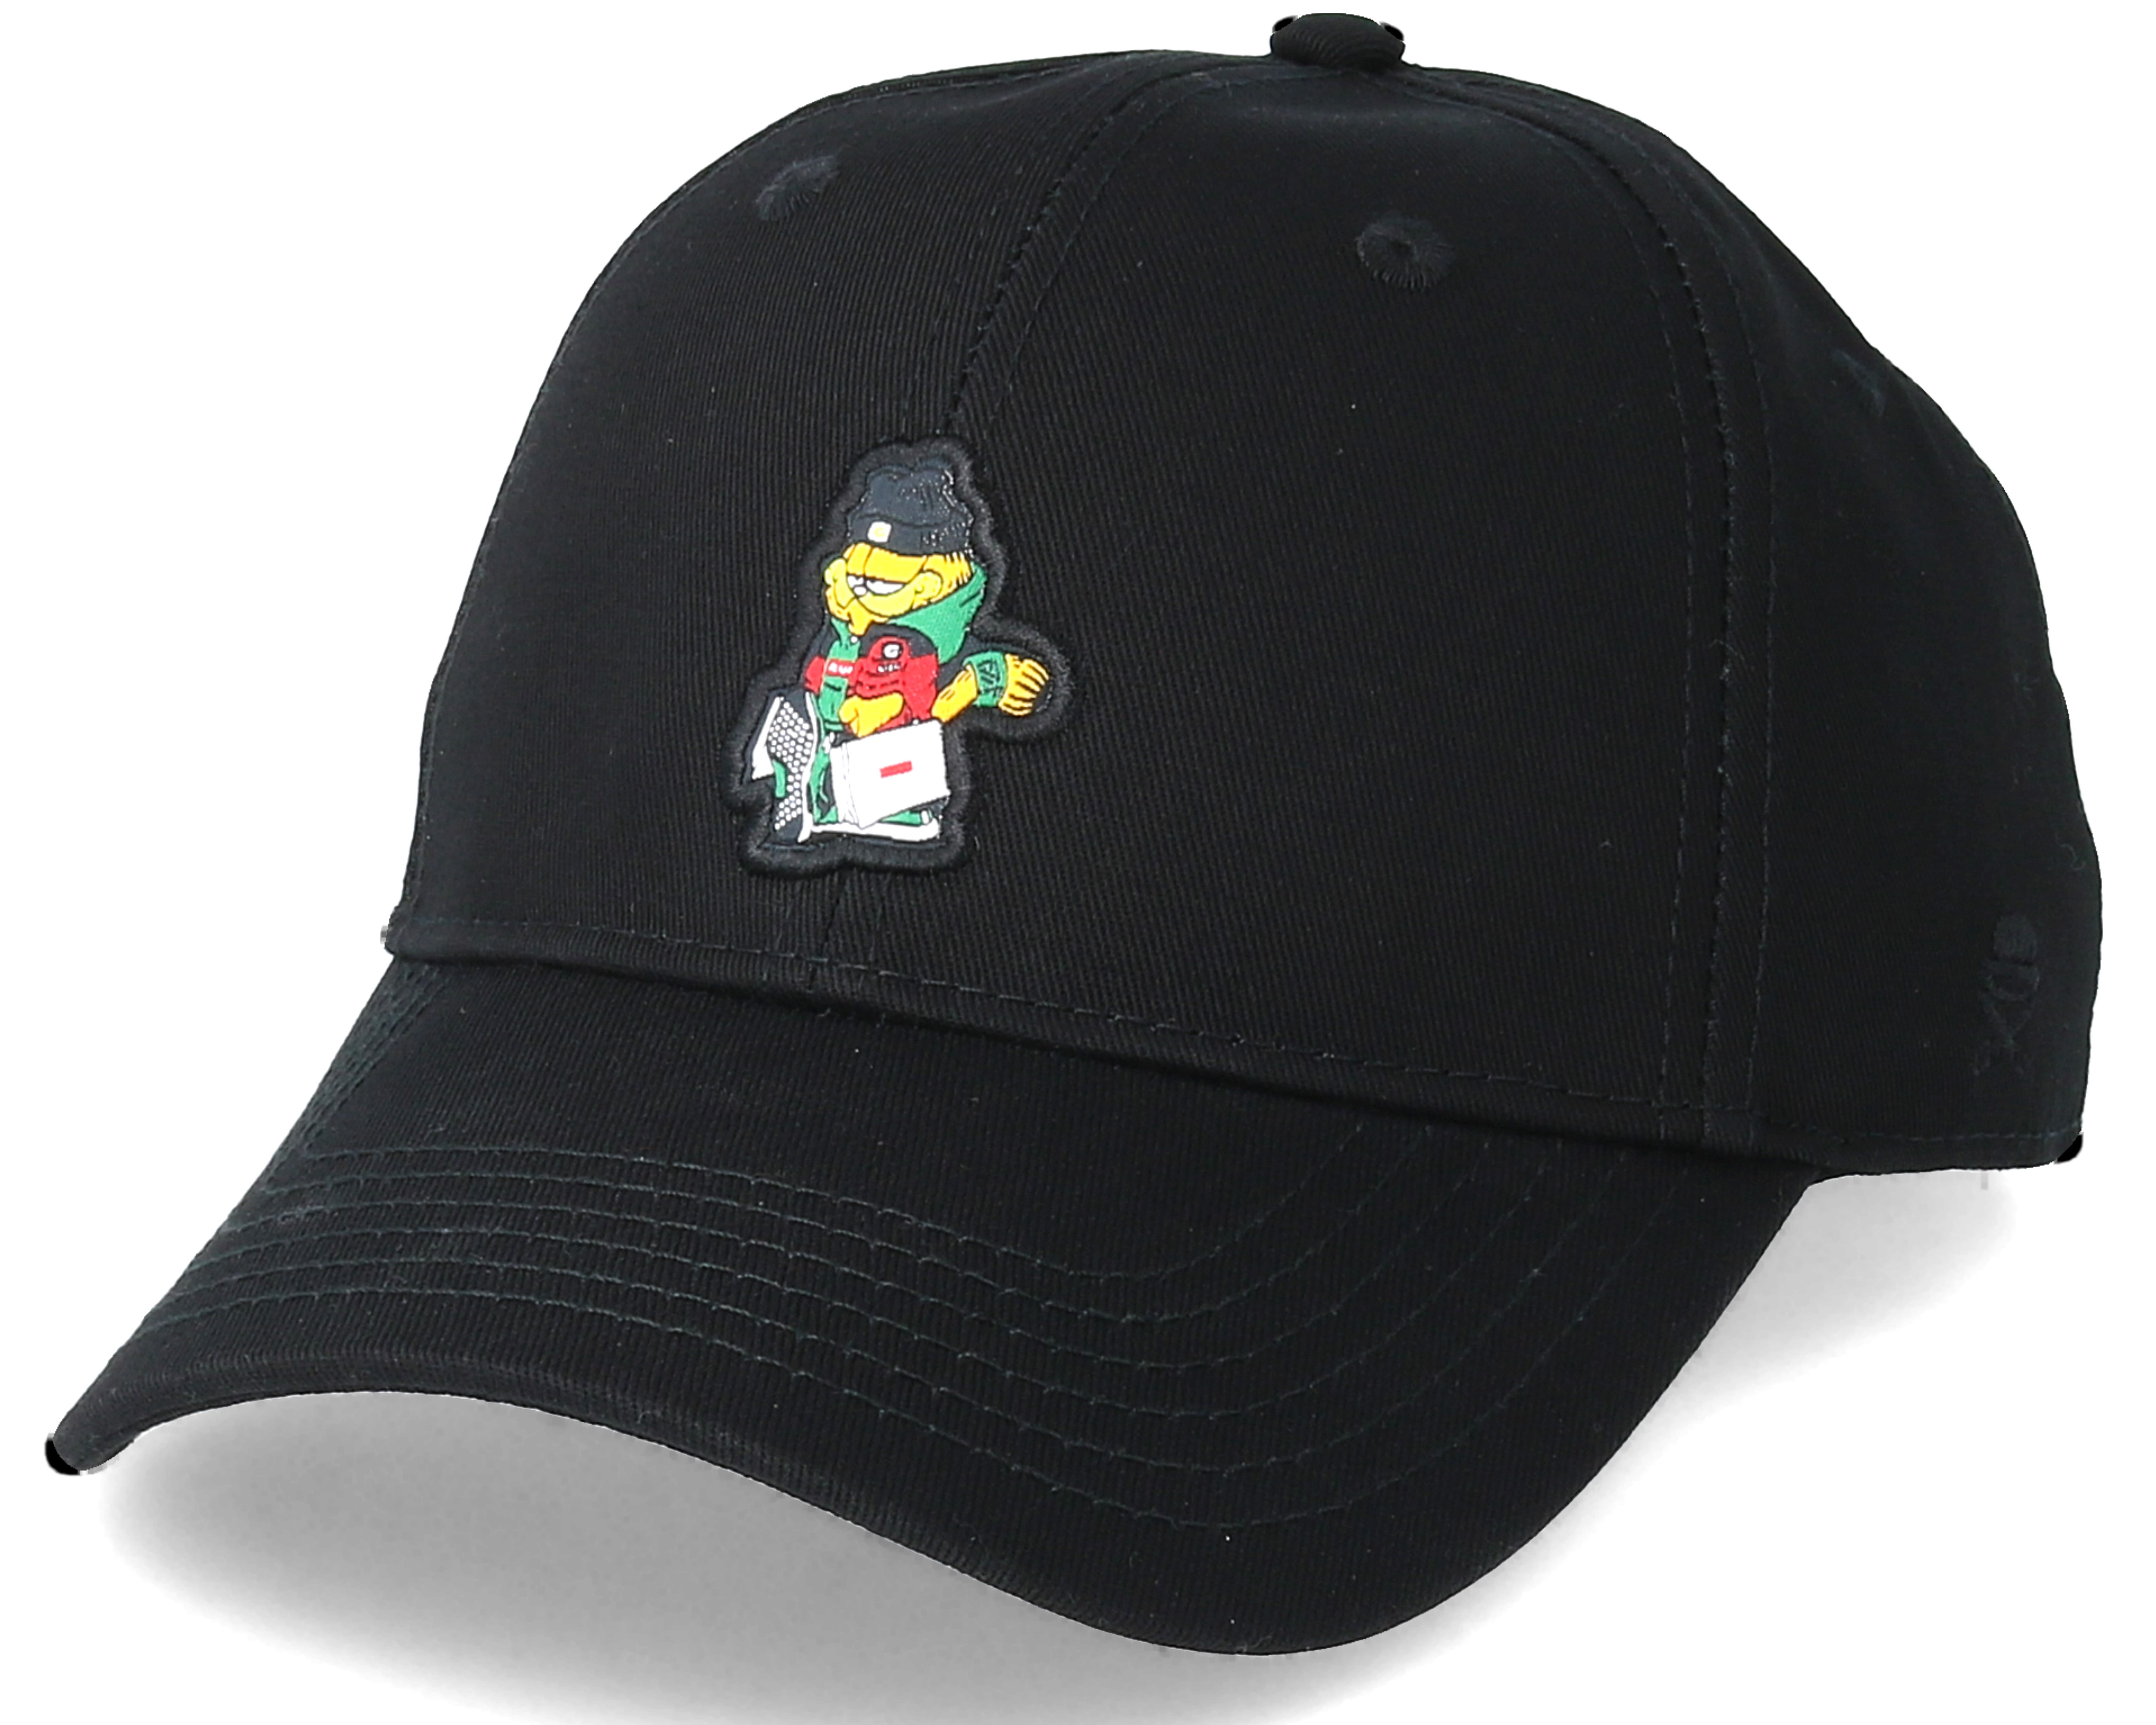 Hyped Garfield Curved Black Adjustable - Cayler & Sons caps